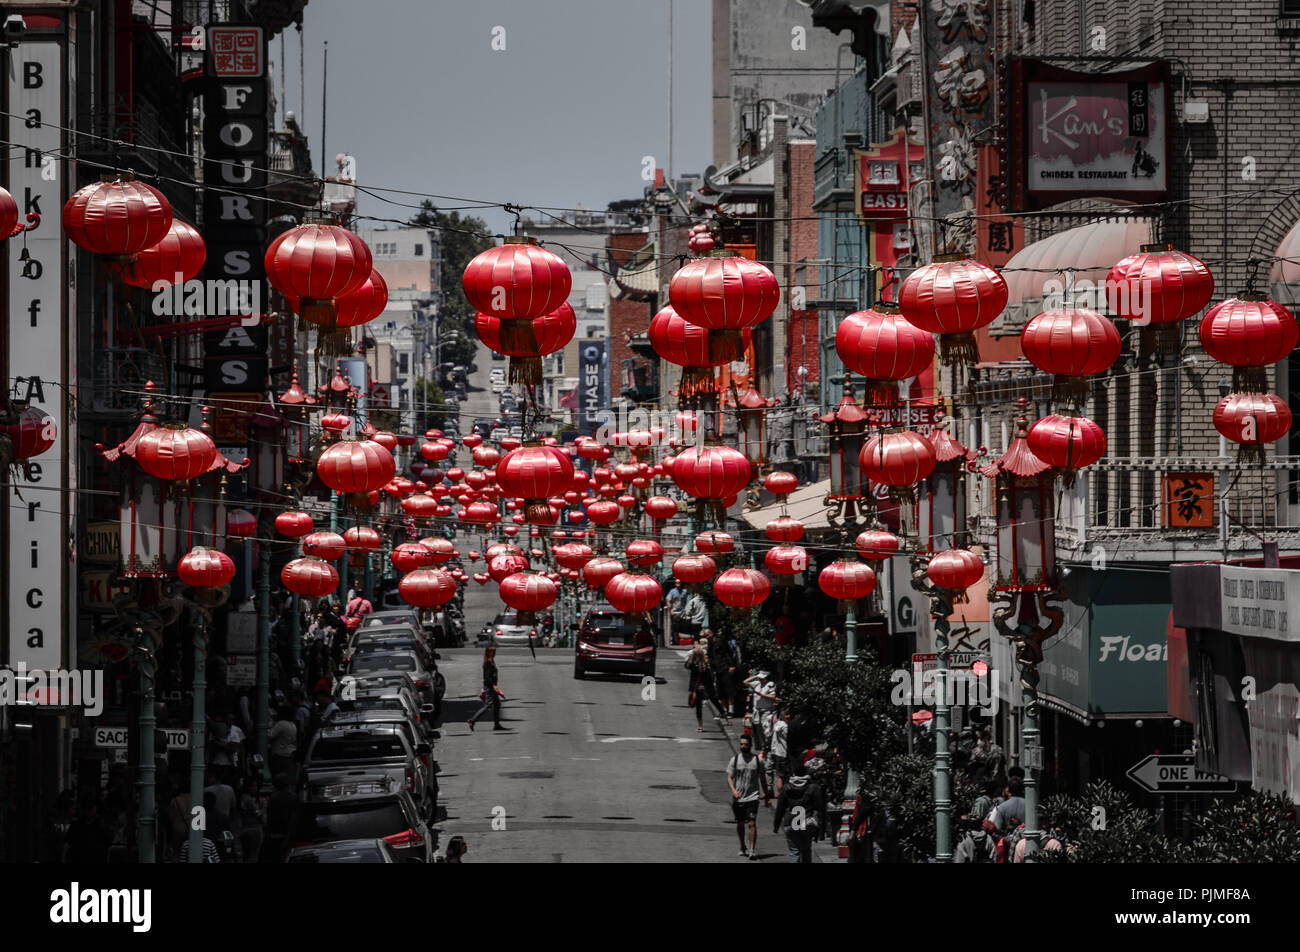 Chinatown In San Francisco With Chinese Lanterns Highlighted Stock Photo